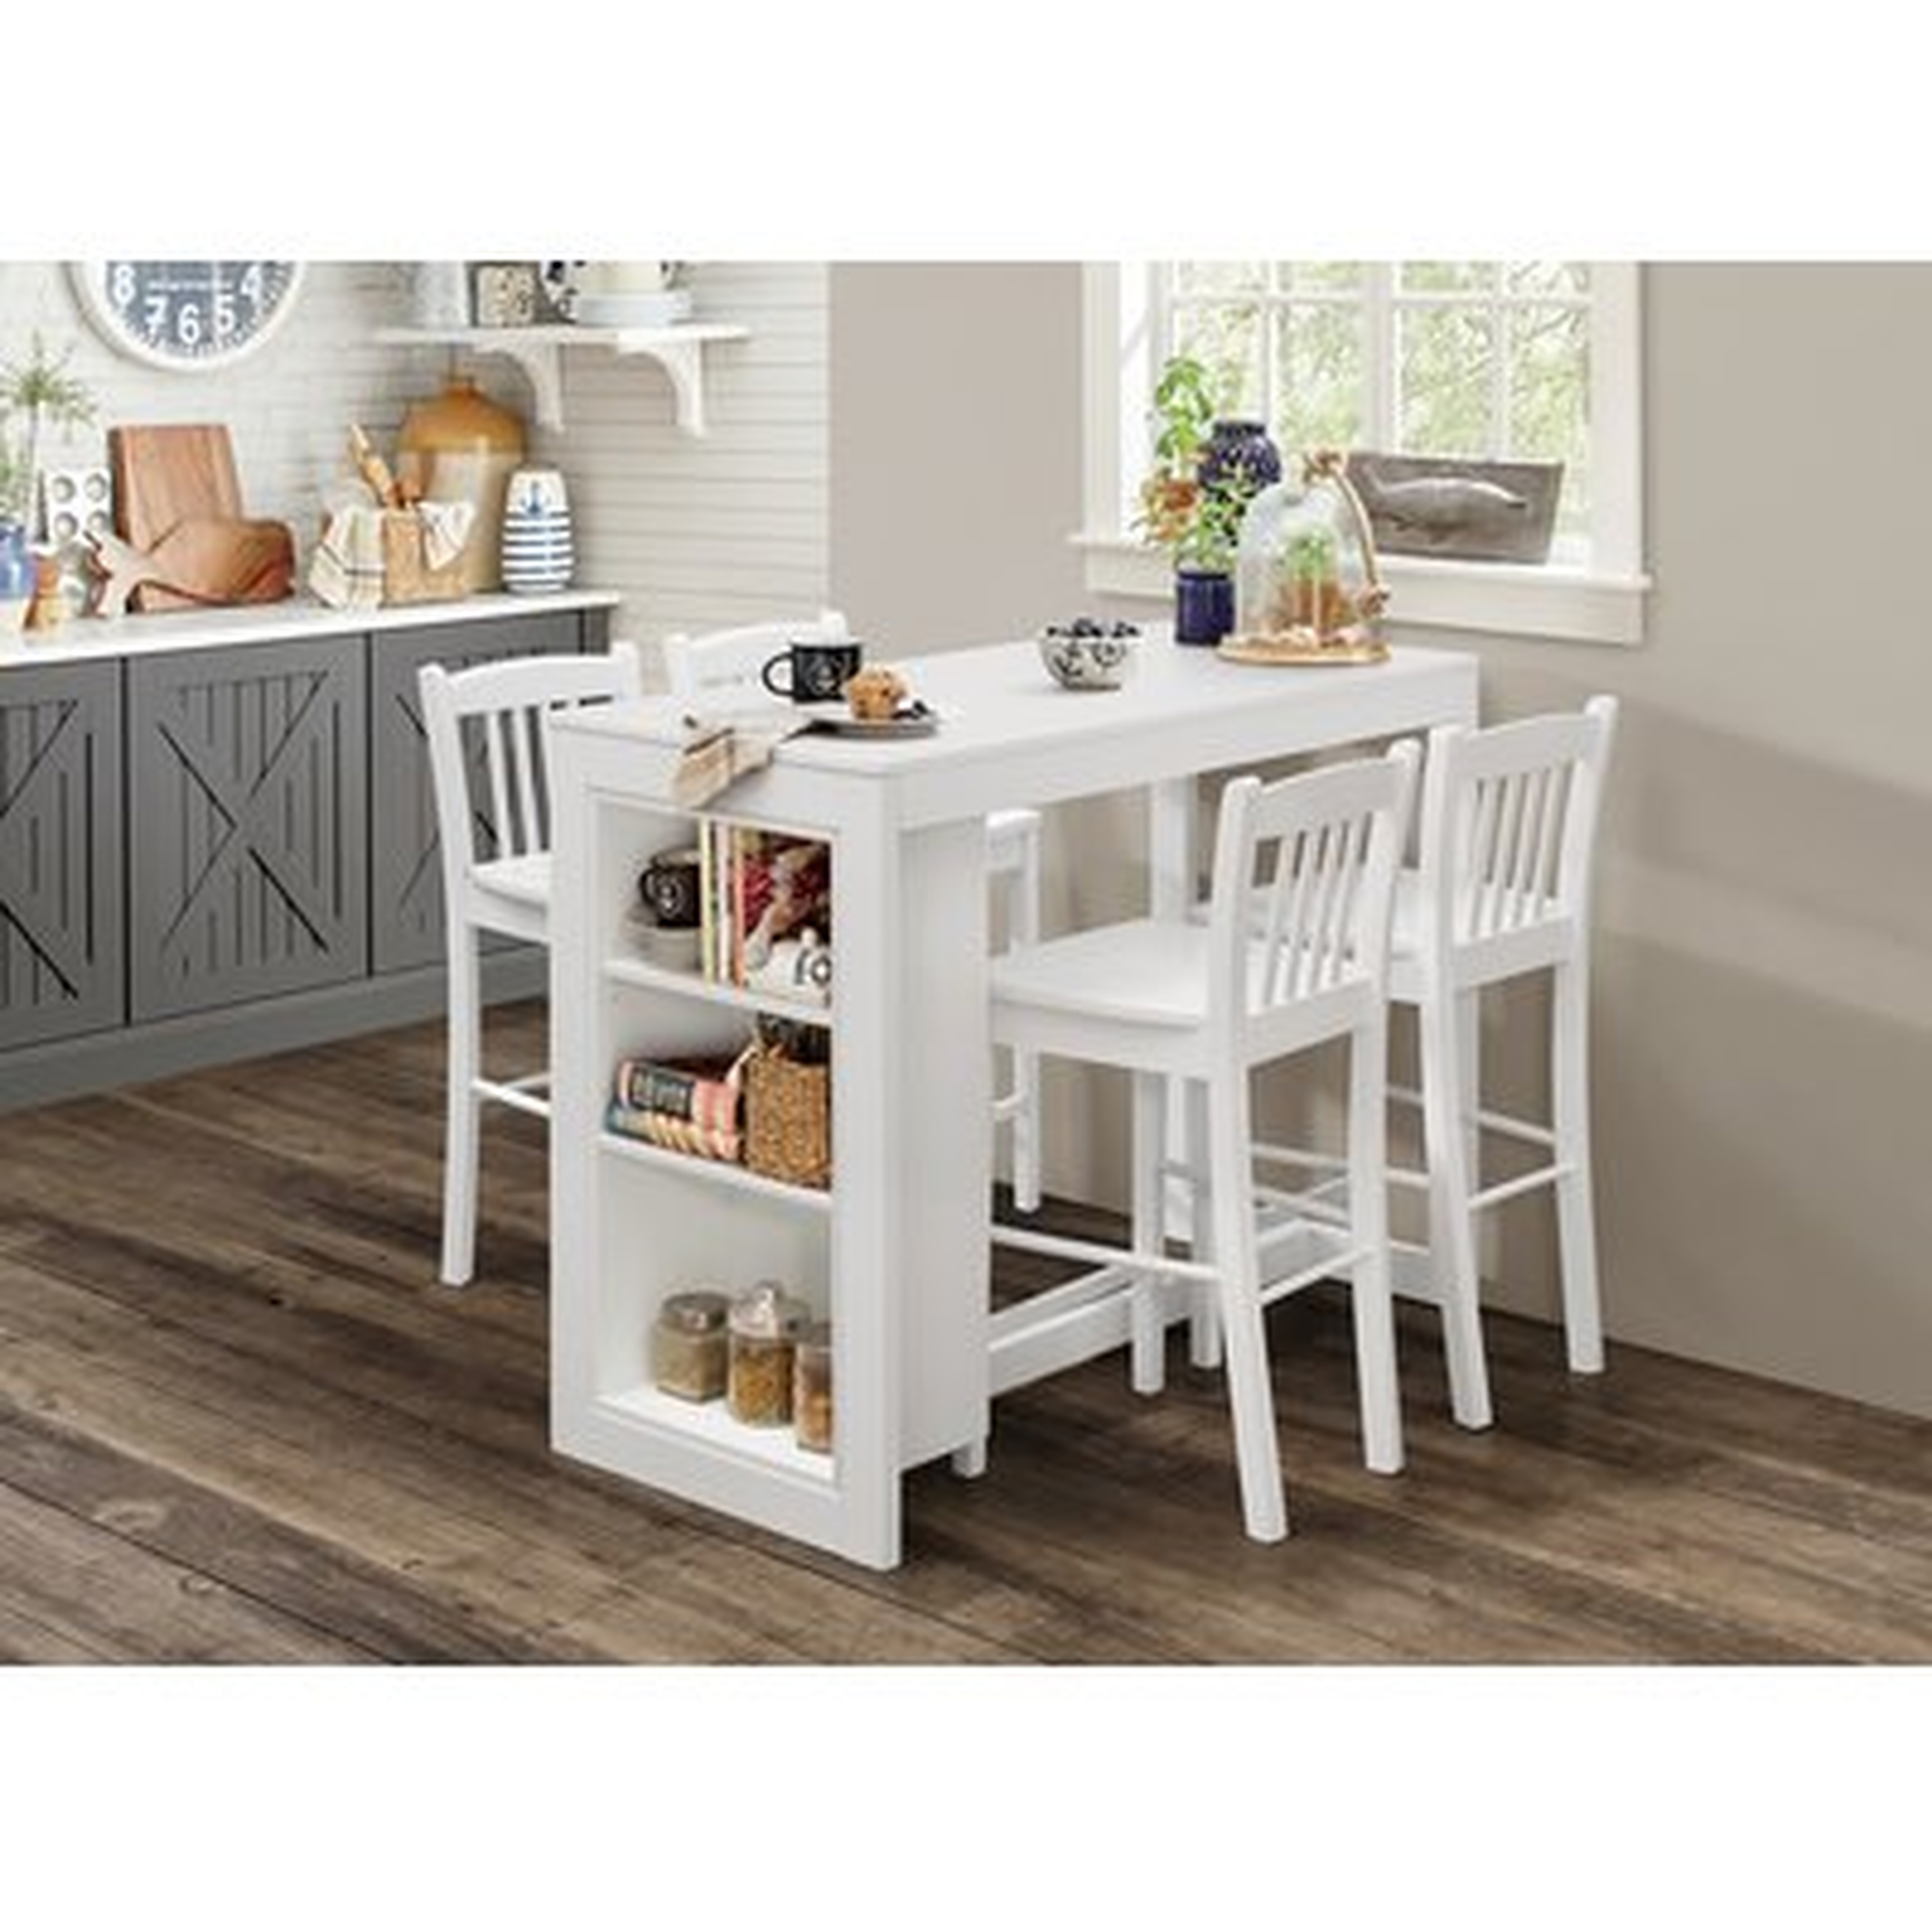 Amandes Counter Height Dining Table - Wayfair